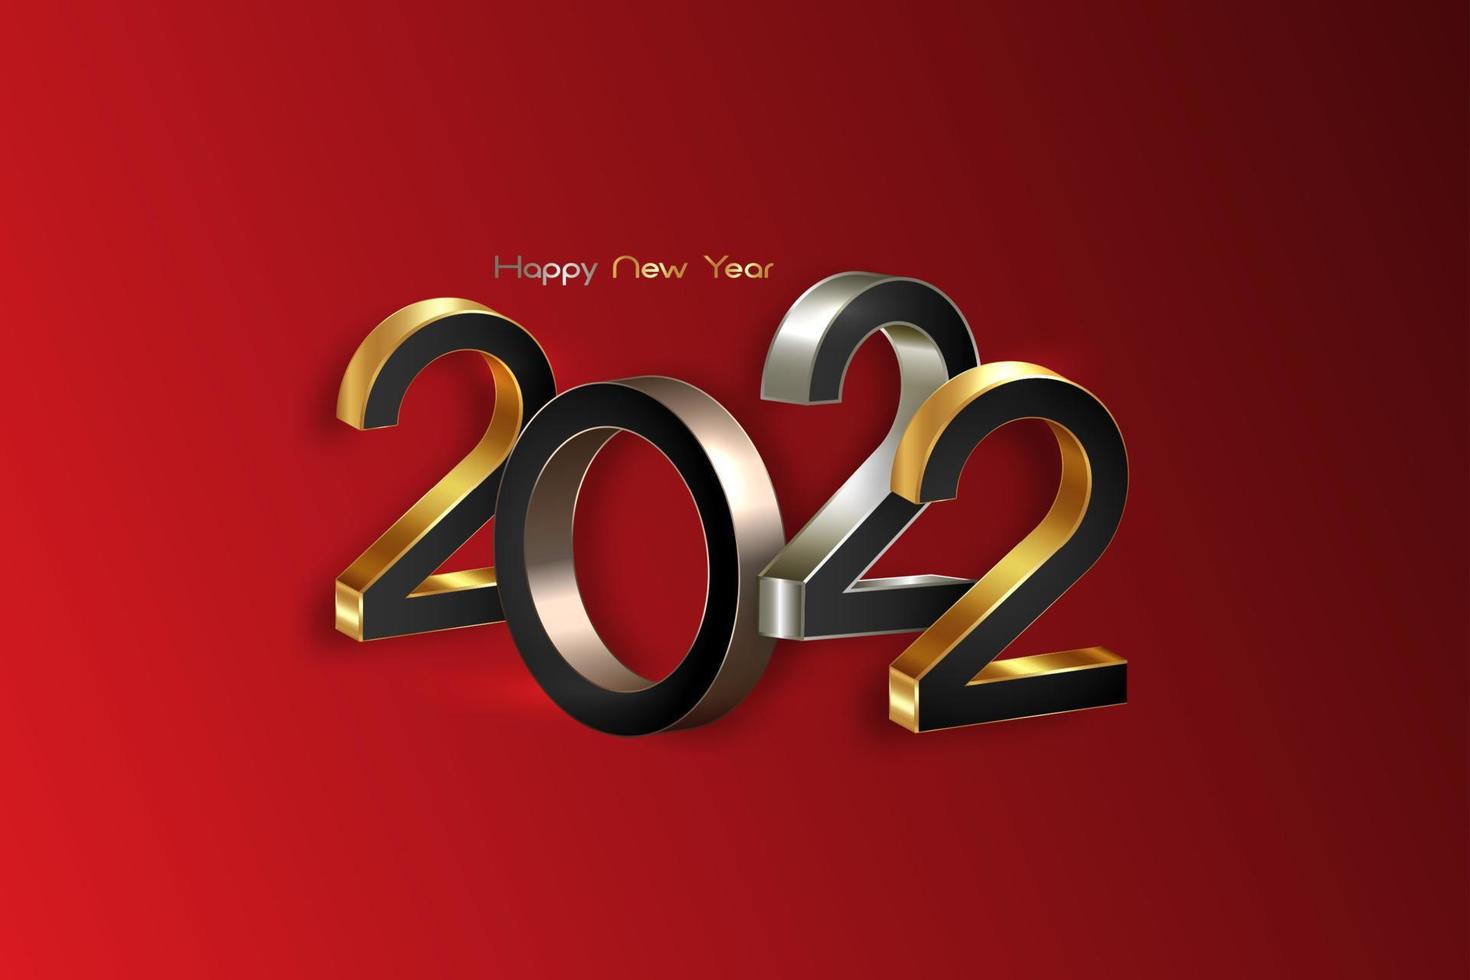 2022 golden, bronze and silver bold letters. New Year 3D logo for Holiday greeting card. Vector illustration isolated on red background, eve fashion luxury template